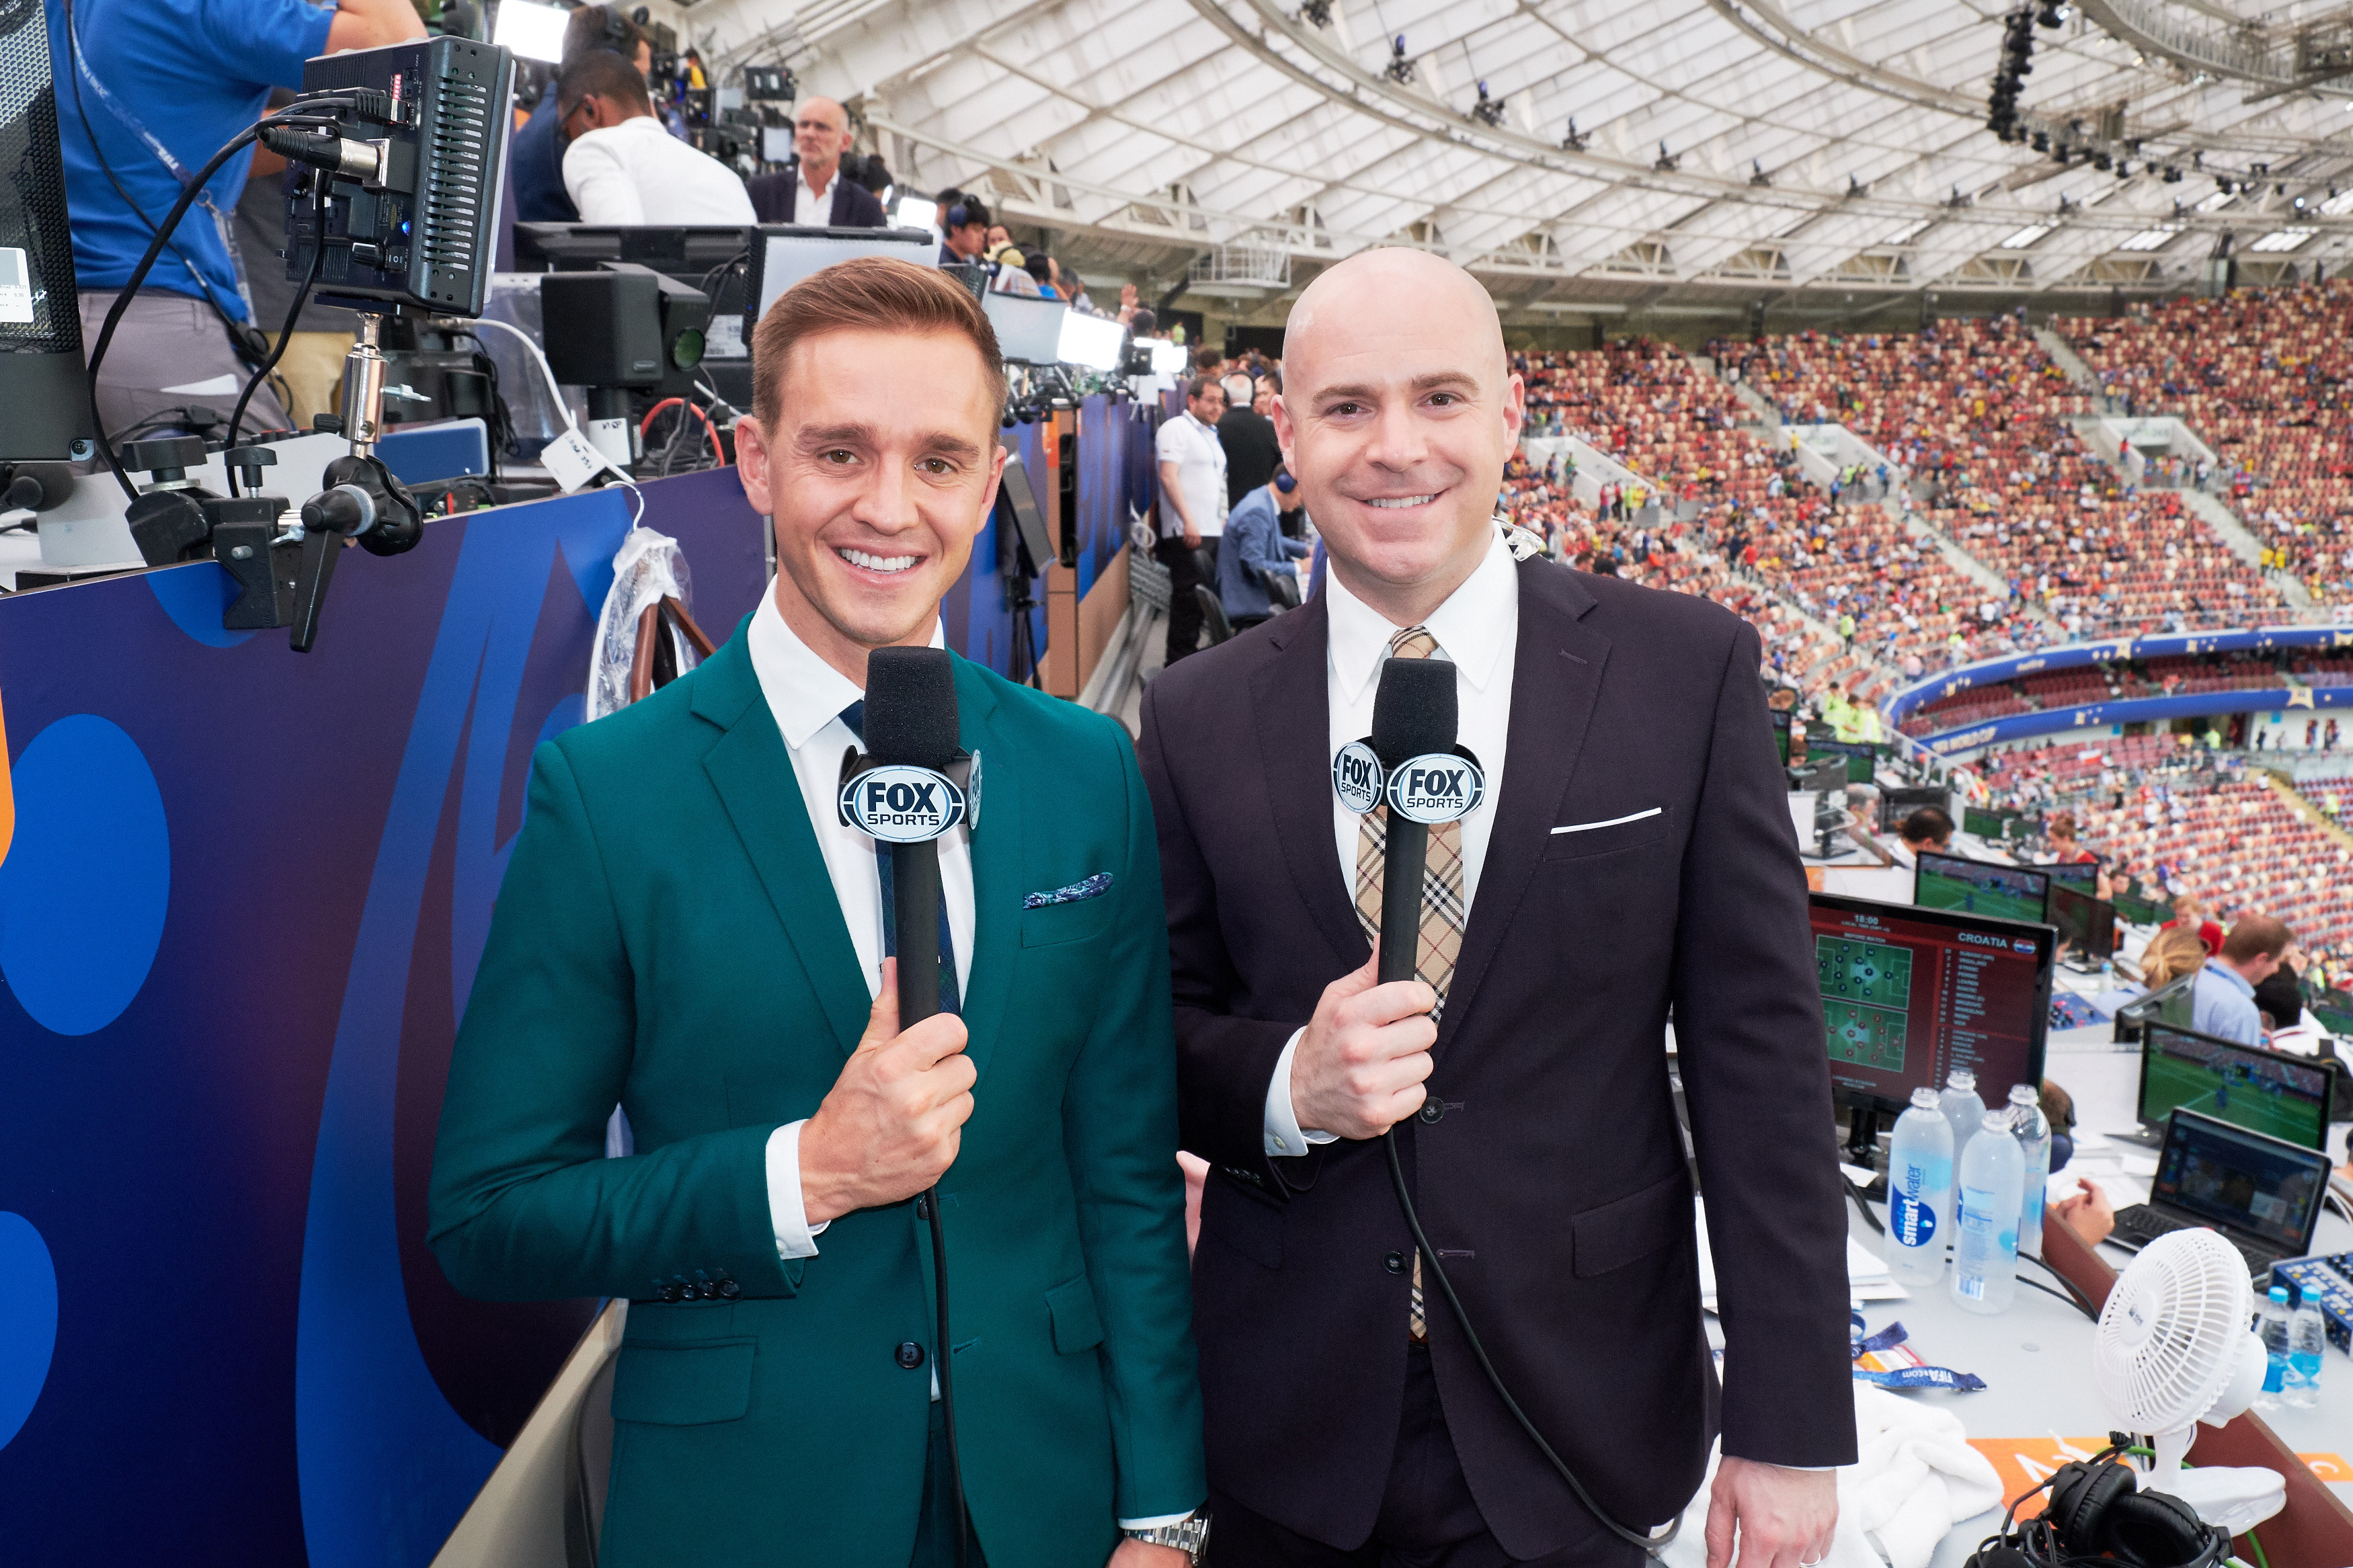 2022 FIFA World Cup TV & Online Broadcast Guide for Brazil in the USA ::  Live Soccer TV